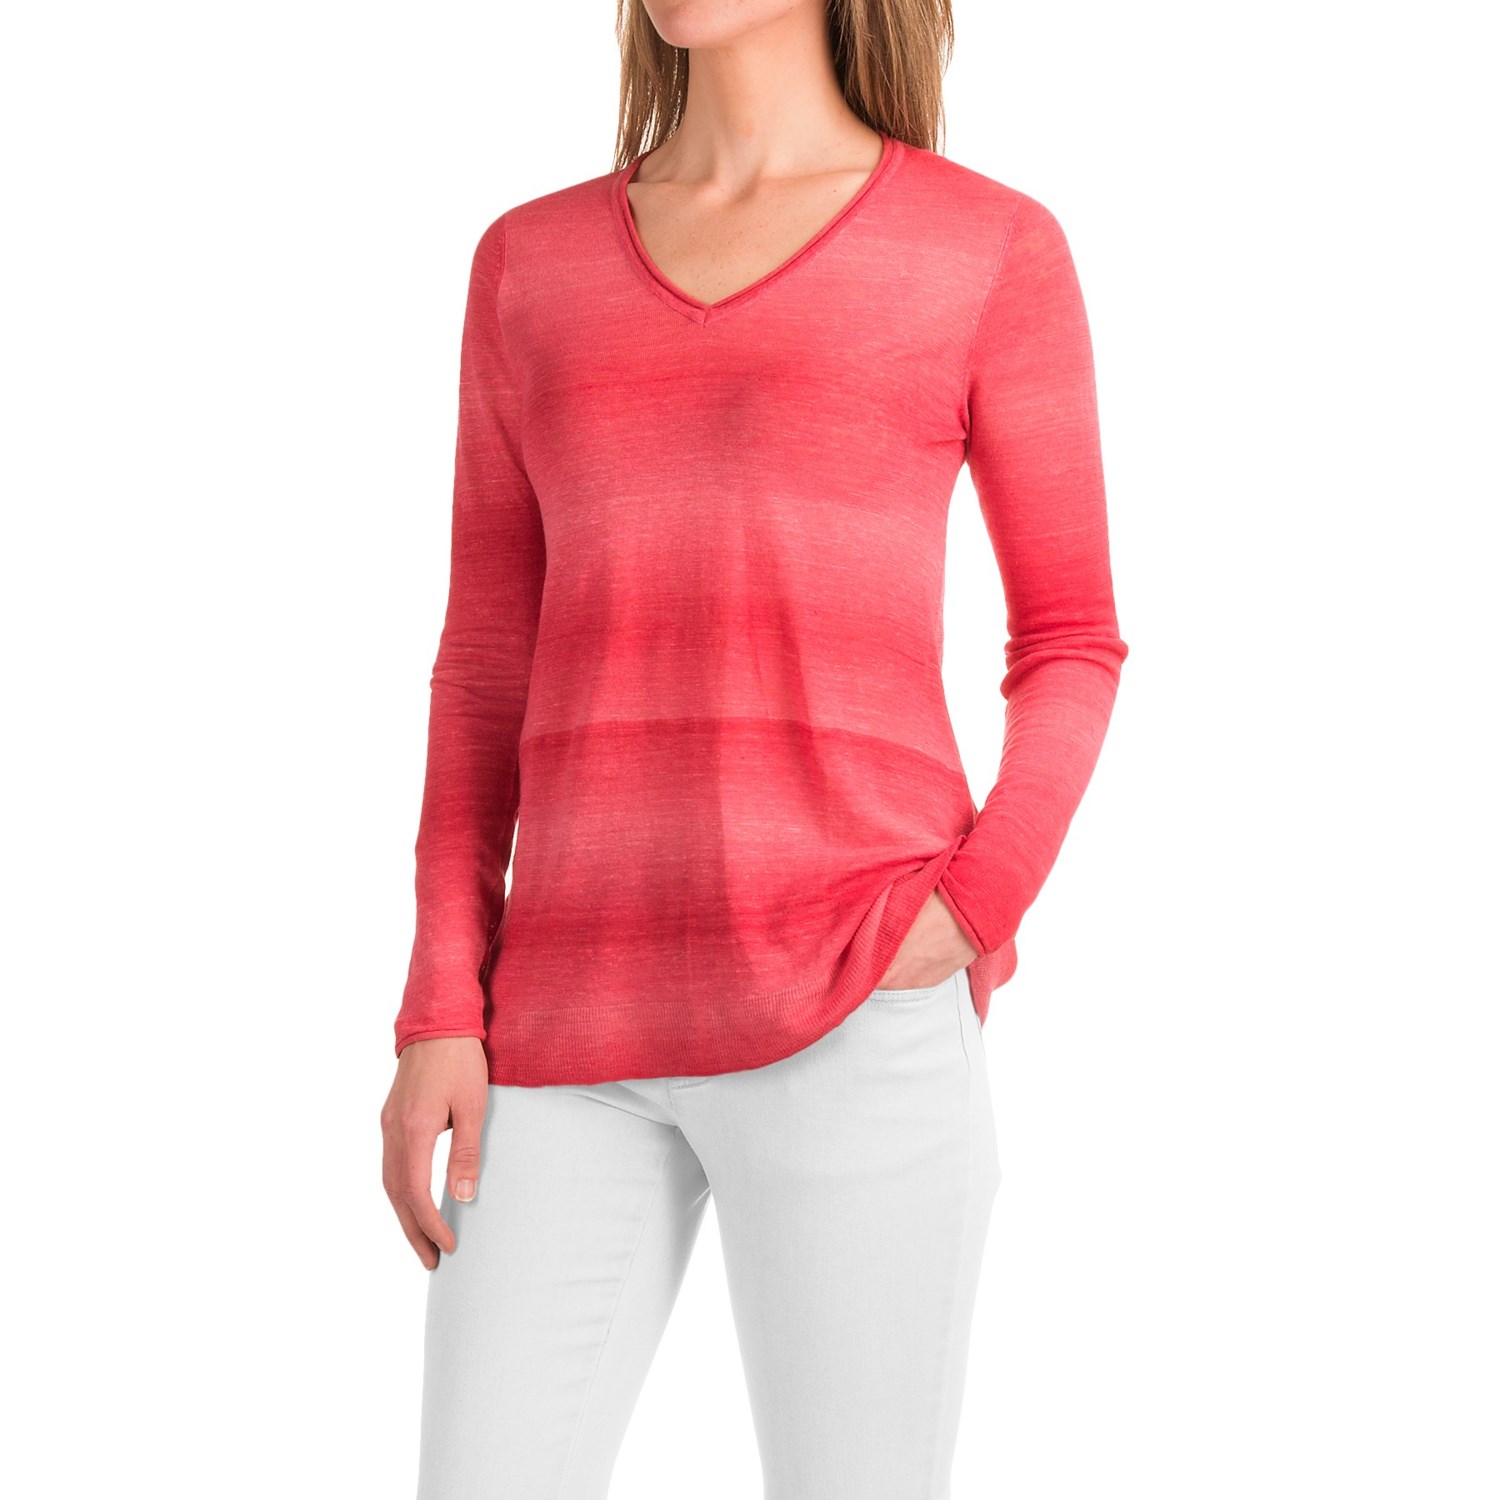 Forte Cashmere Space-Dyed Knit Shirt – Linen, Long Sleeve (For Women)